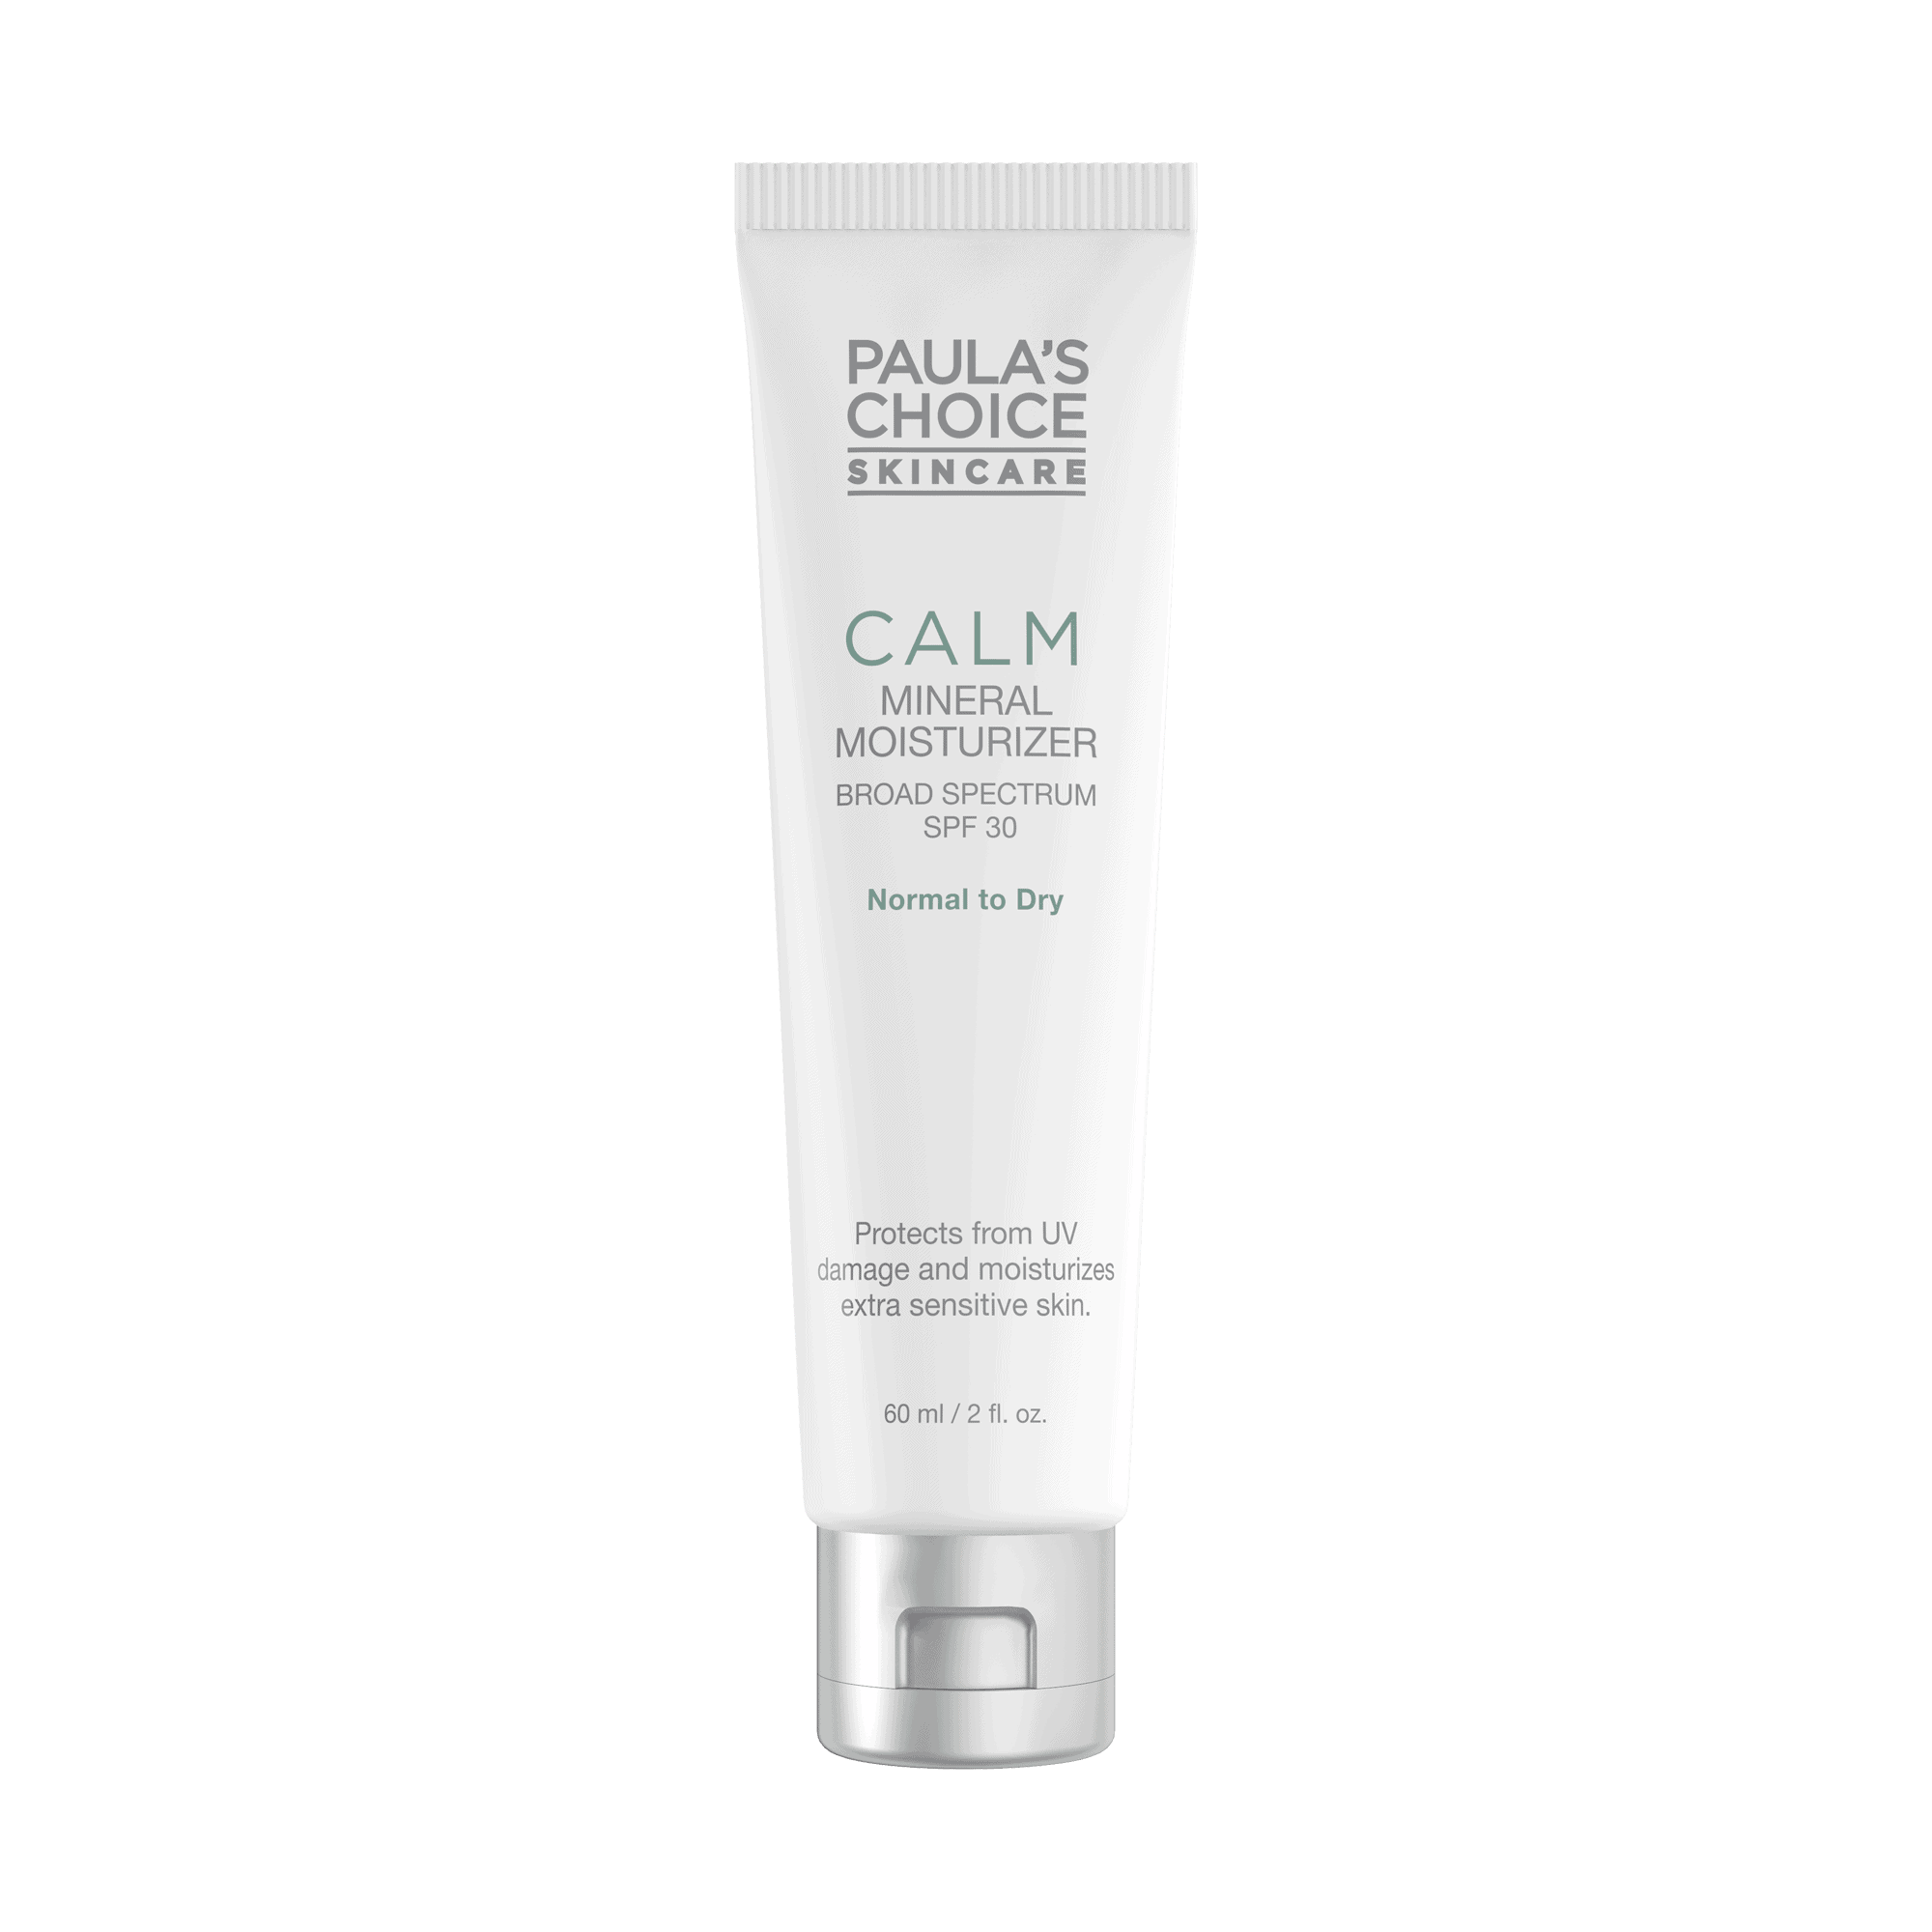 Paula’s Choice Calm Redness Relief SPF 30 Mineral Moisturizer for Normal to Dry Skin